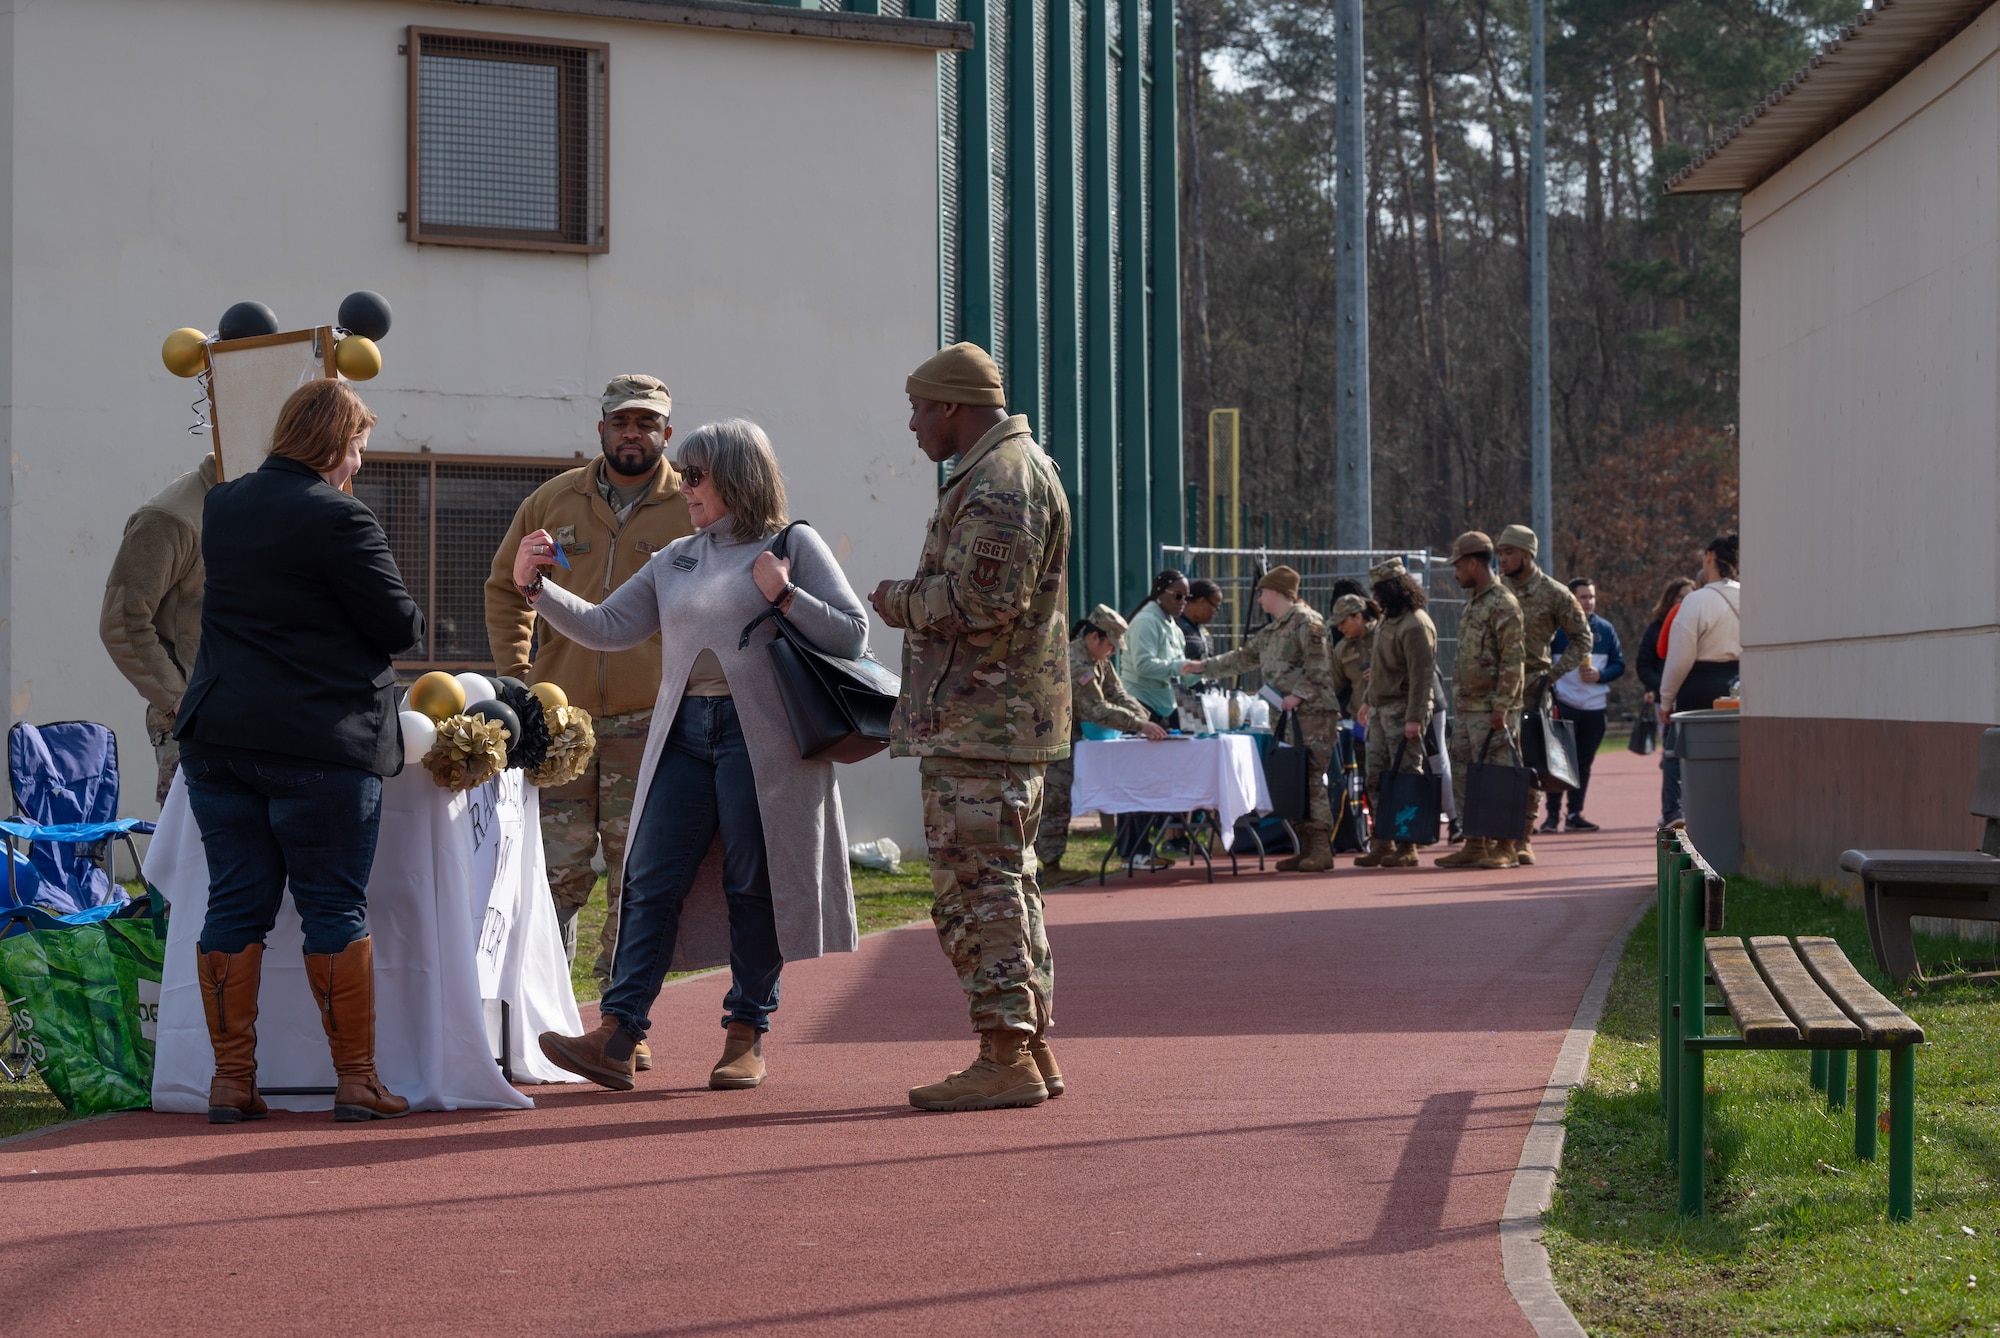 Participants at the Sexual Assault Prevention and Response Volksmarch event meet multiple helping agencies while walking around a running track at Ramstein Air Base, Germany, April 6, 2023. The SAPR program here offers resources to victims and can be reached through their hotline number +49 (0)6371-47-7272. (U.S. Air Force photo by Senior Airman Andrew Bertain)